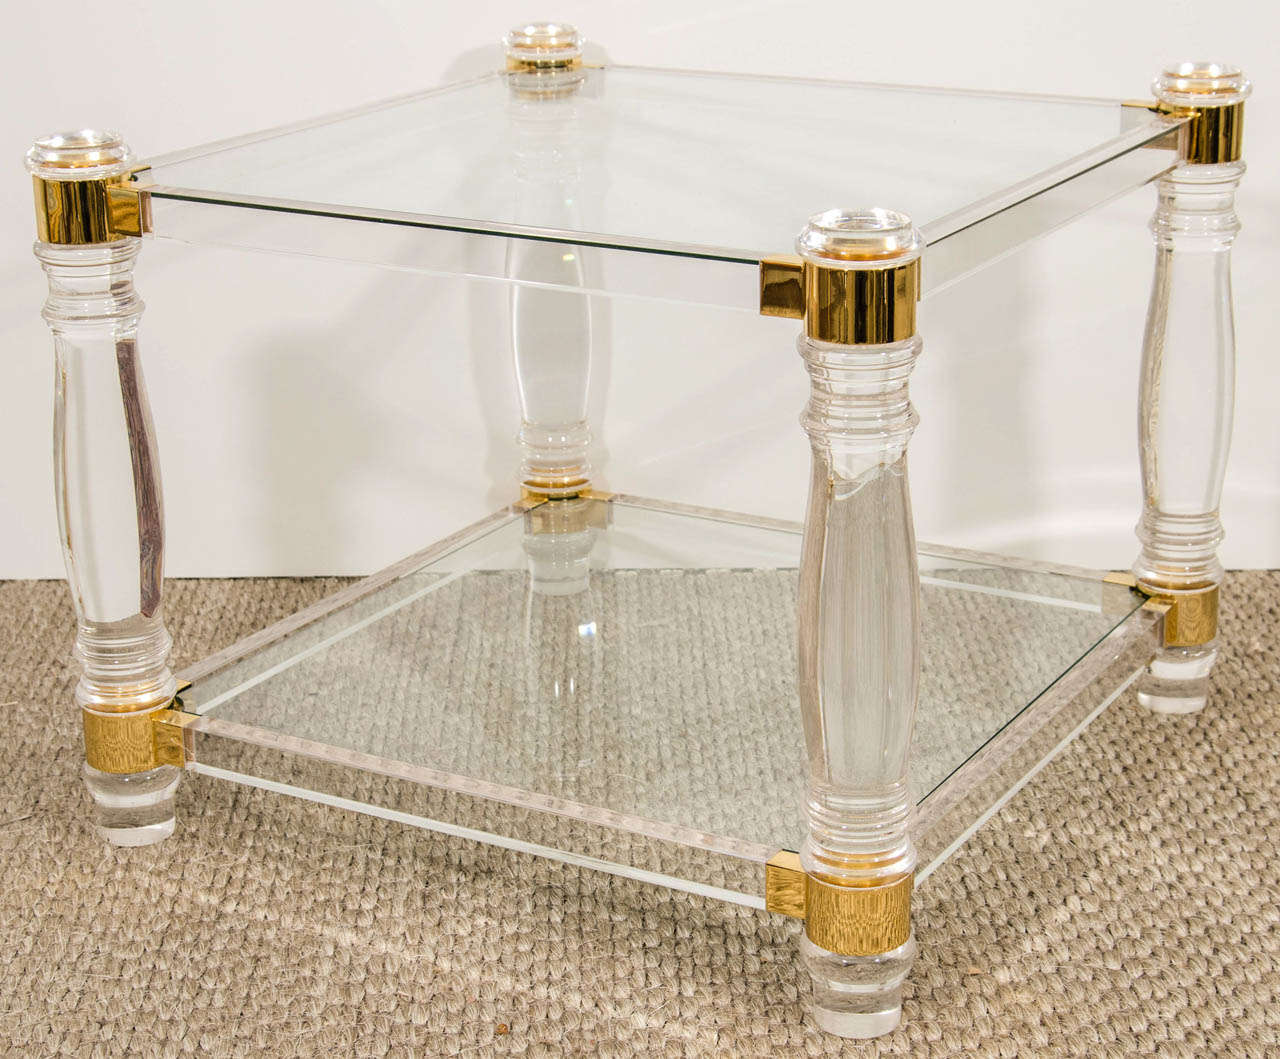 A very striking pair of tables that combine tradtional design elements (turned legs) and modern materials (lucite and glass).  This duo can go anywhere.